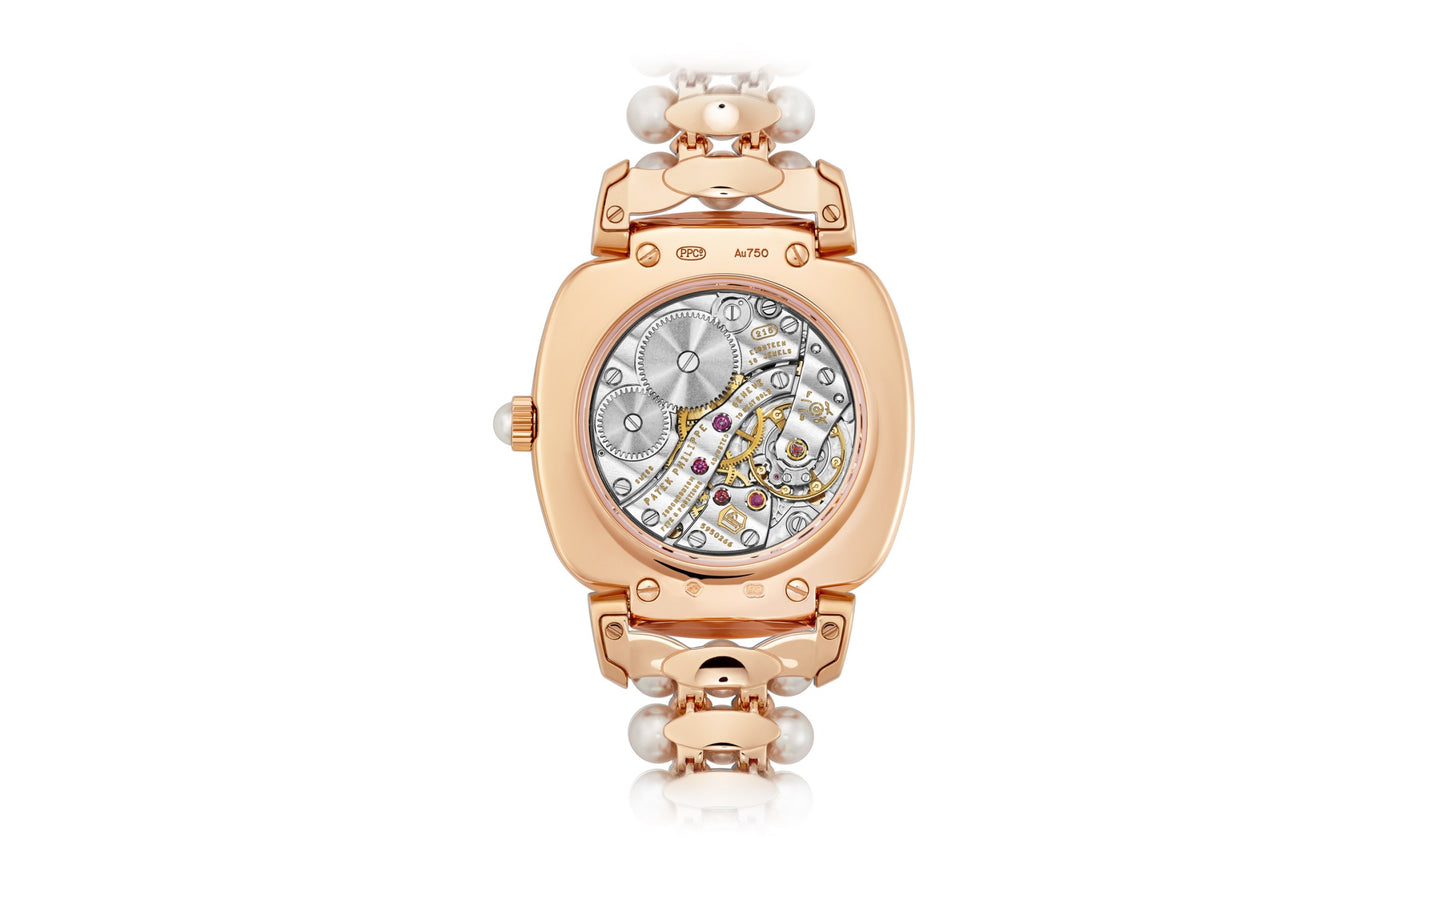 Patek Philippe Ladies Gondolo Haute Joaillerie, 18kt Rose Gold set with diamonds and Akoya pearls, 31 × 34.8mm, Ref# 7042/100R-010, Back